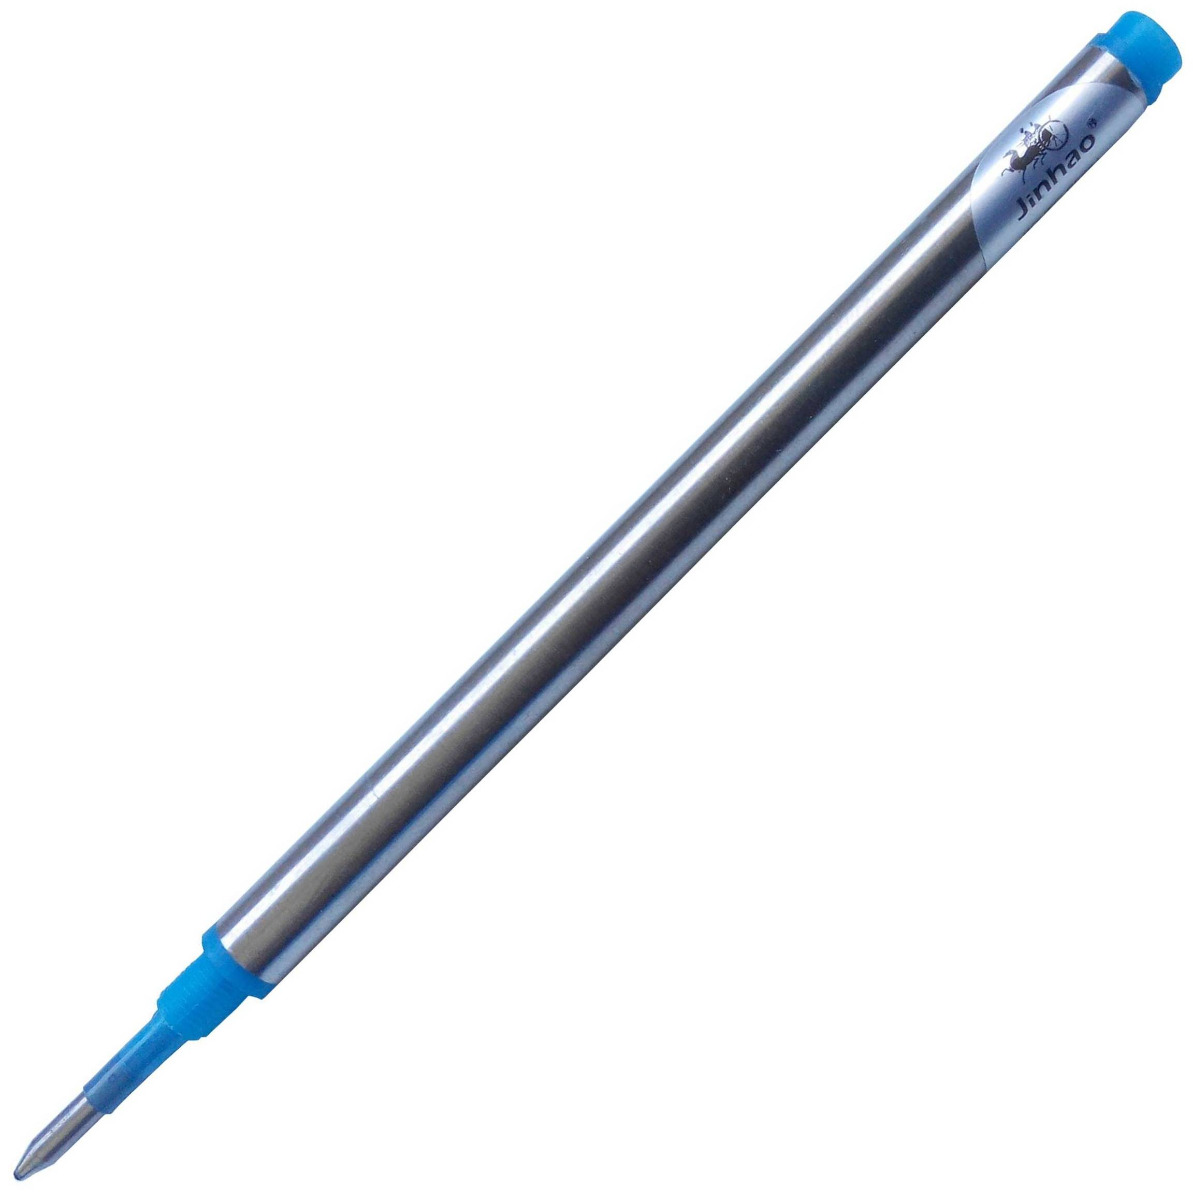 JINHAO 0.5MM METAL BODY BLUE COLOR THREAD TYPE – ROLLER BALL REFILL MODEL: 11125